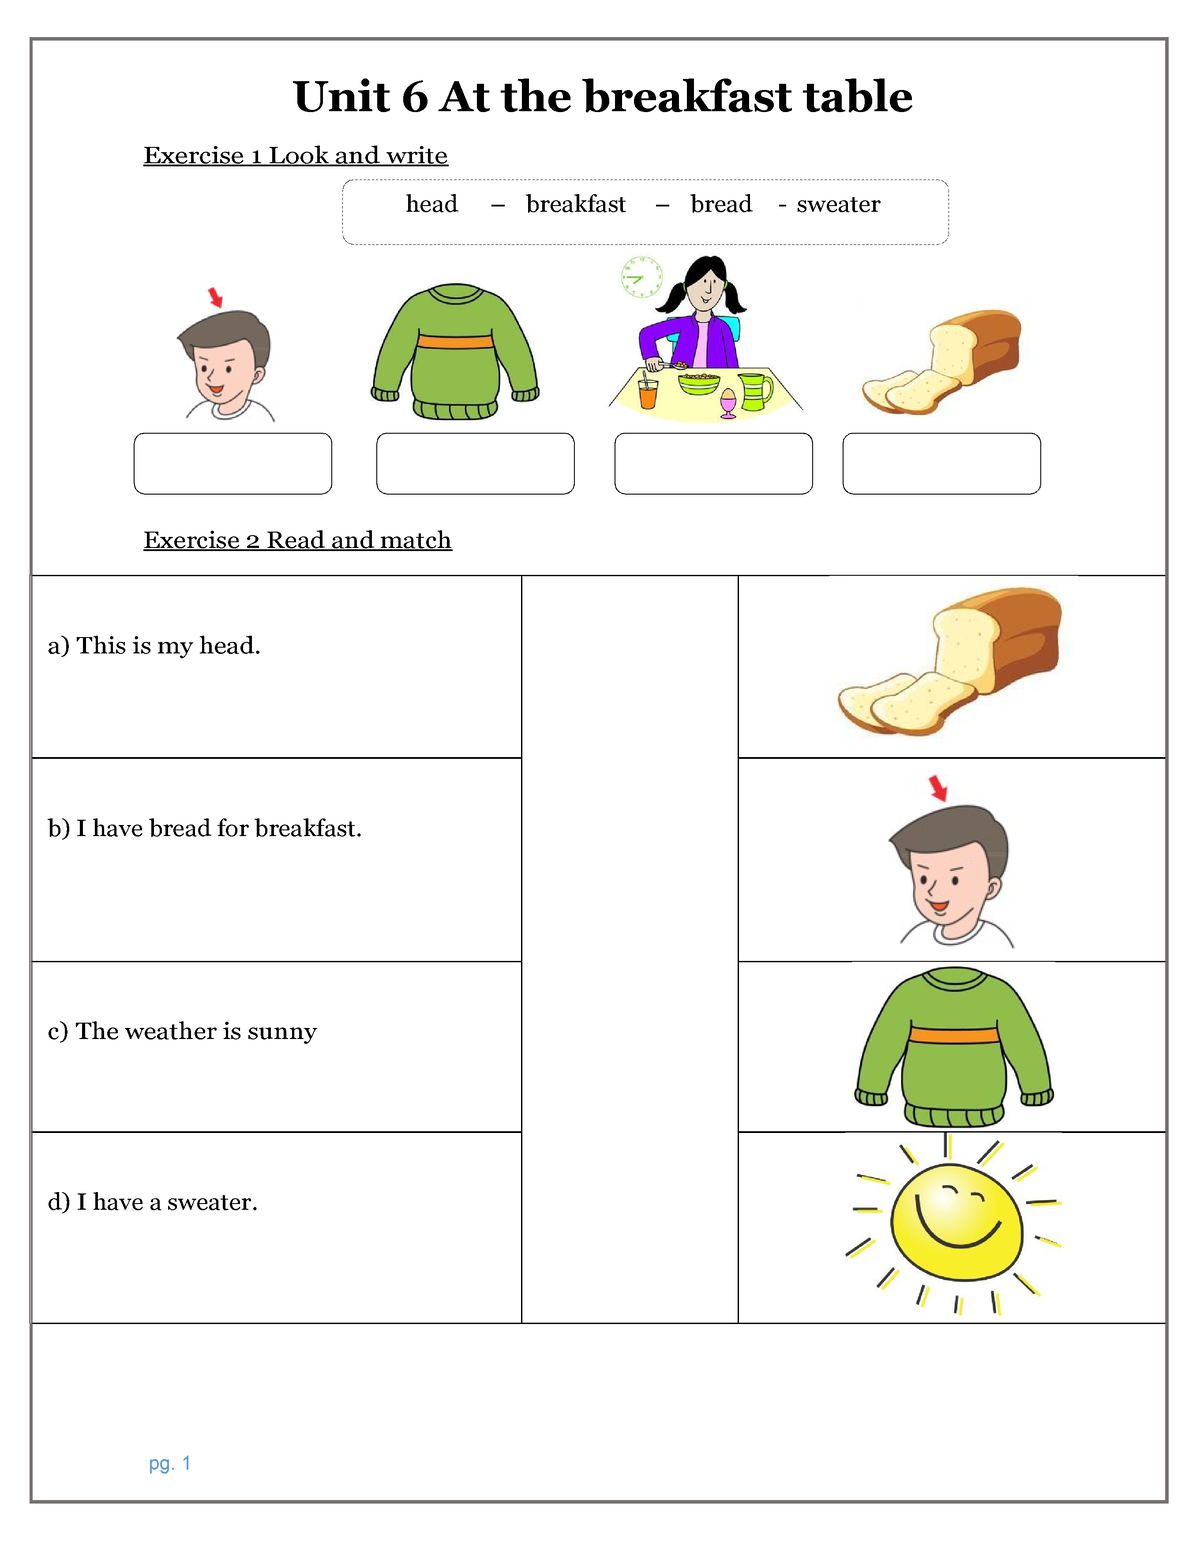 Bài tập lớp 2 Macmillan Unit 6 - Unit 6 At the breakfast table Exercise 1 Look and write head – - Studocu